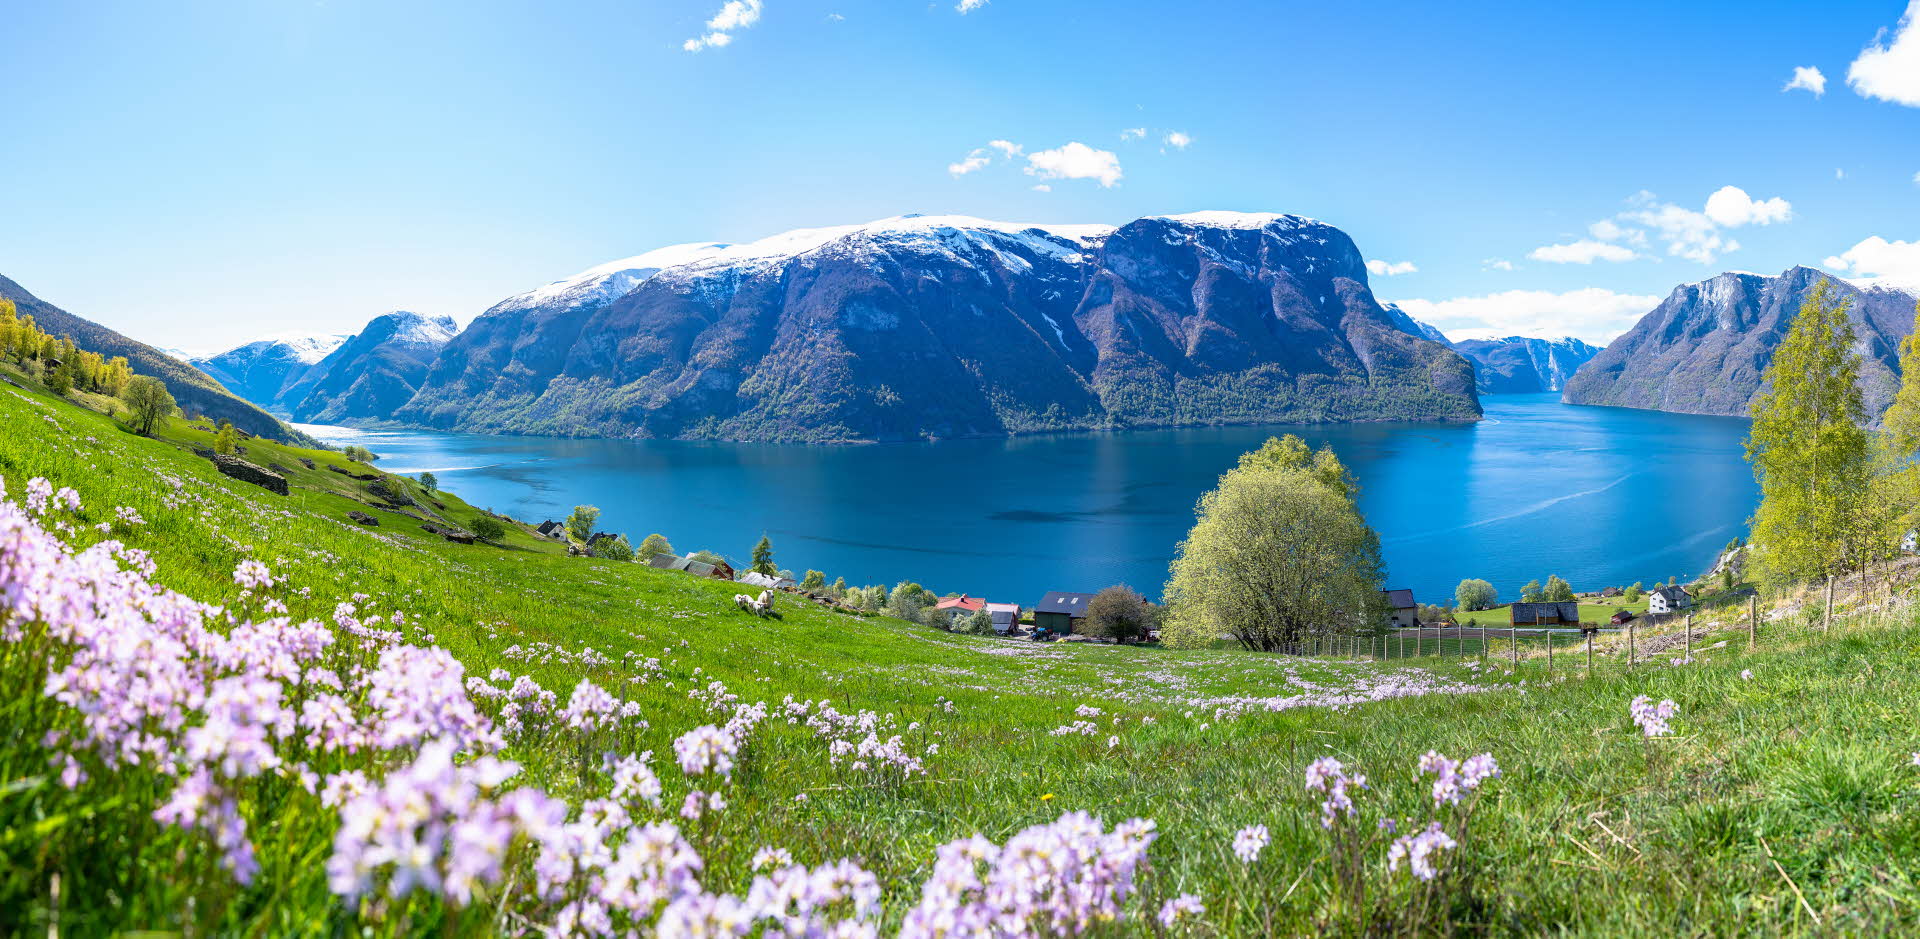 Panoramic view over green, flowering meadows with sheep in Aurland, with views over the UNESCO-listed Aurlandsfjord in Norway